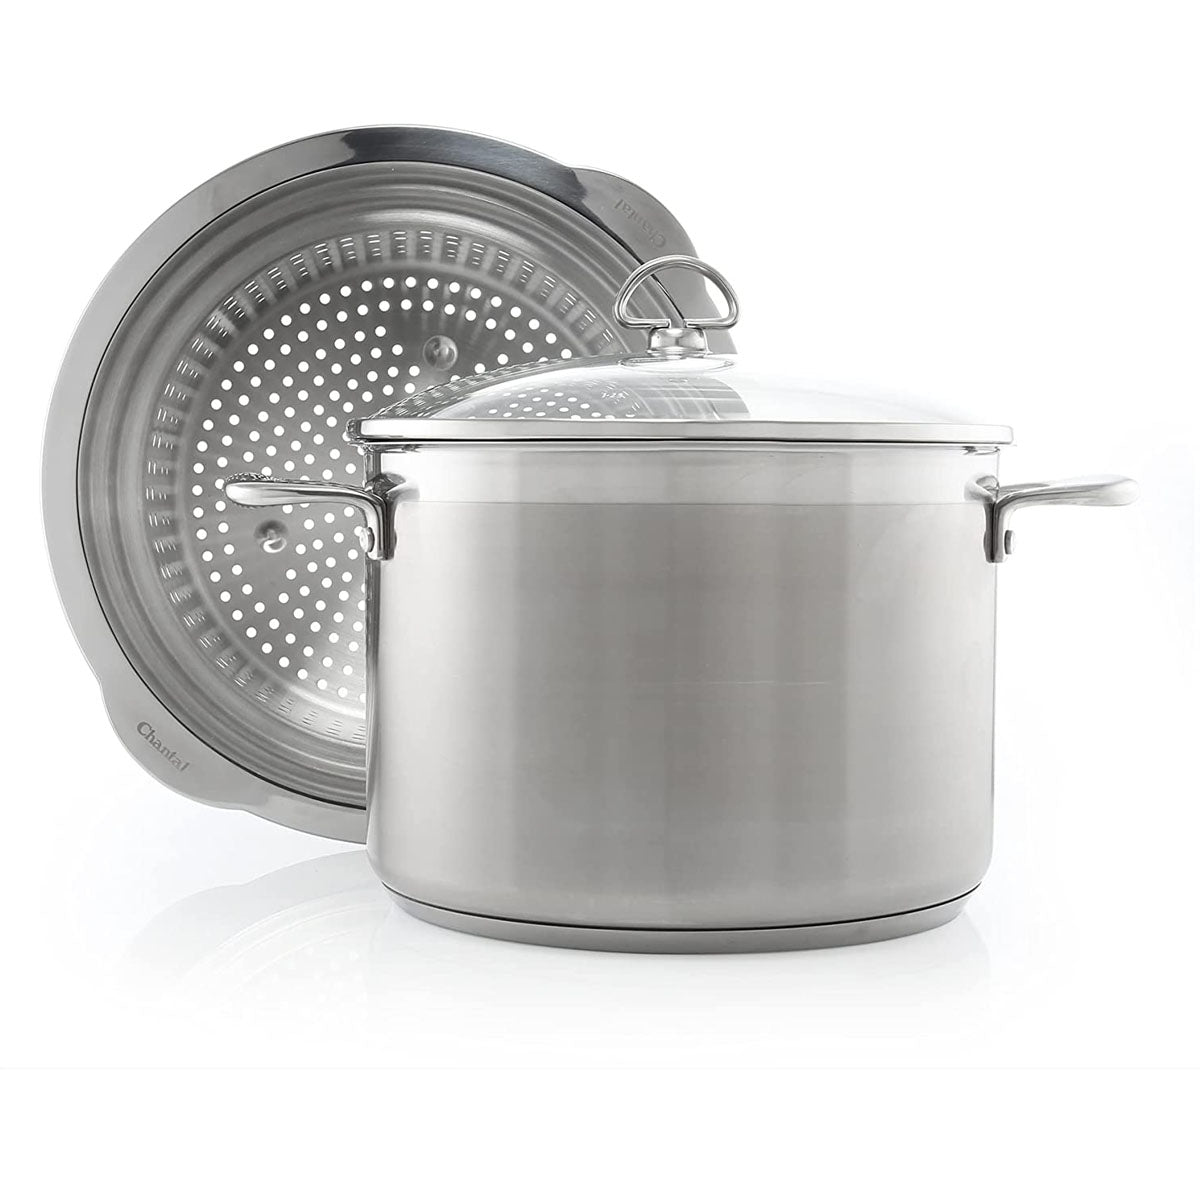 Chantal Induction 21 Steel Soup Pot with Glass Tempered Lid (2-Quart)